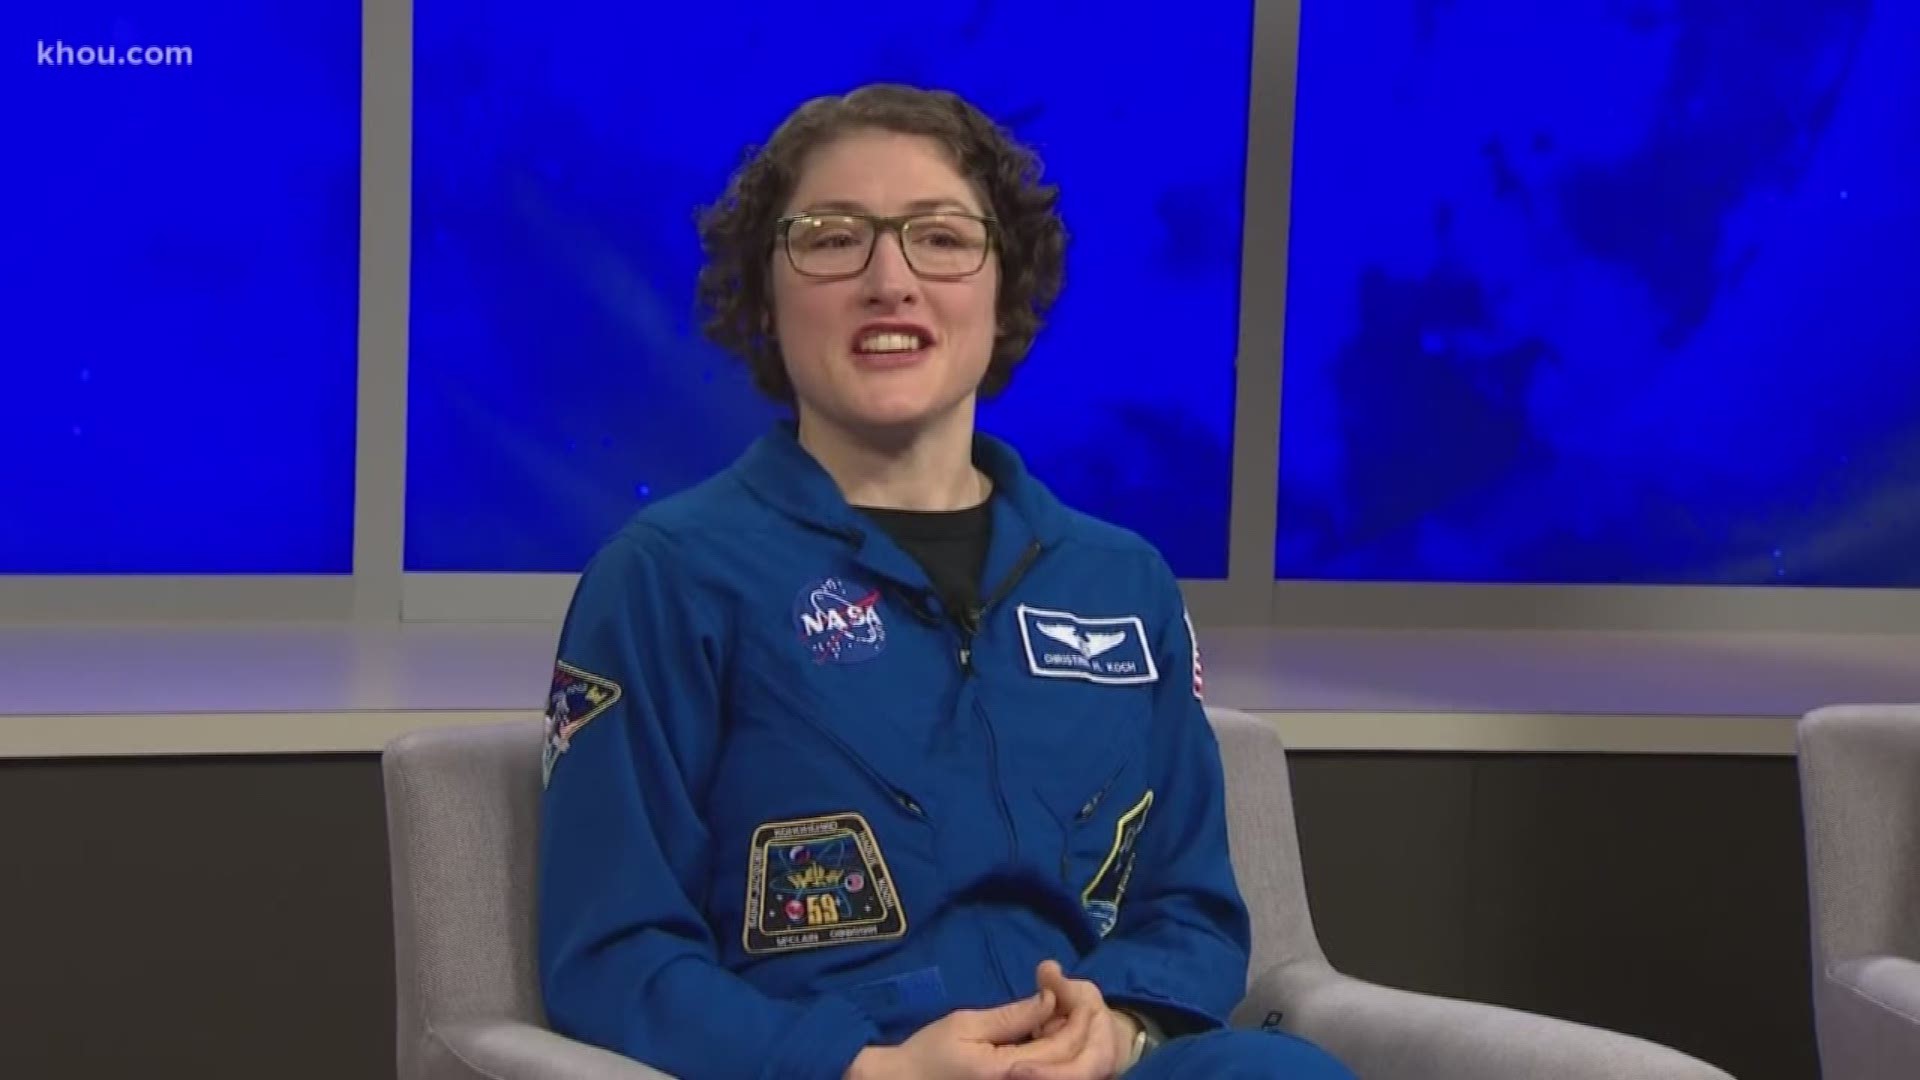 Local astronaut Christina Koch reflects on her historic space mission.